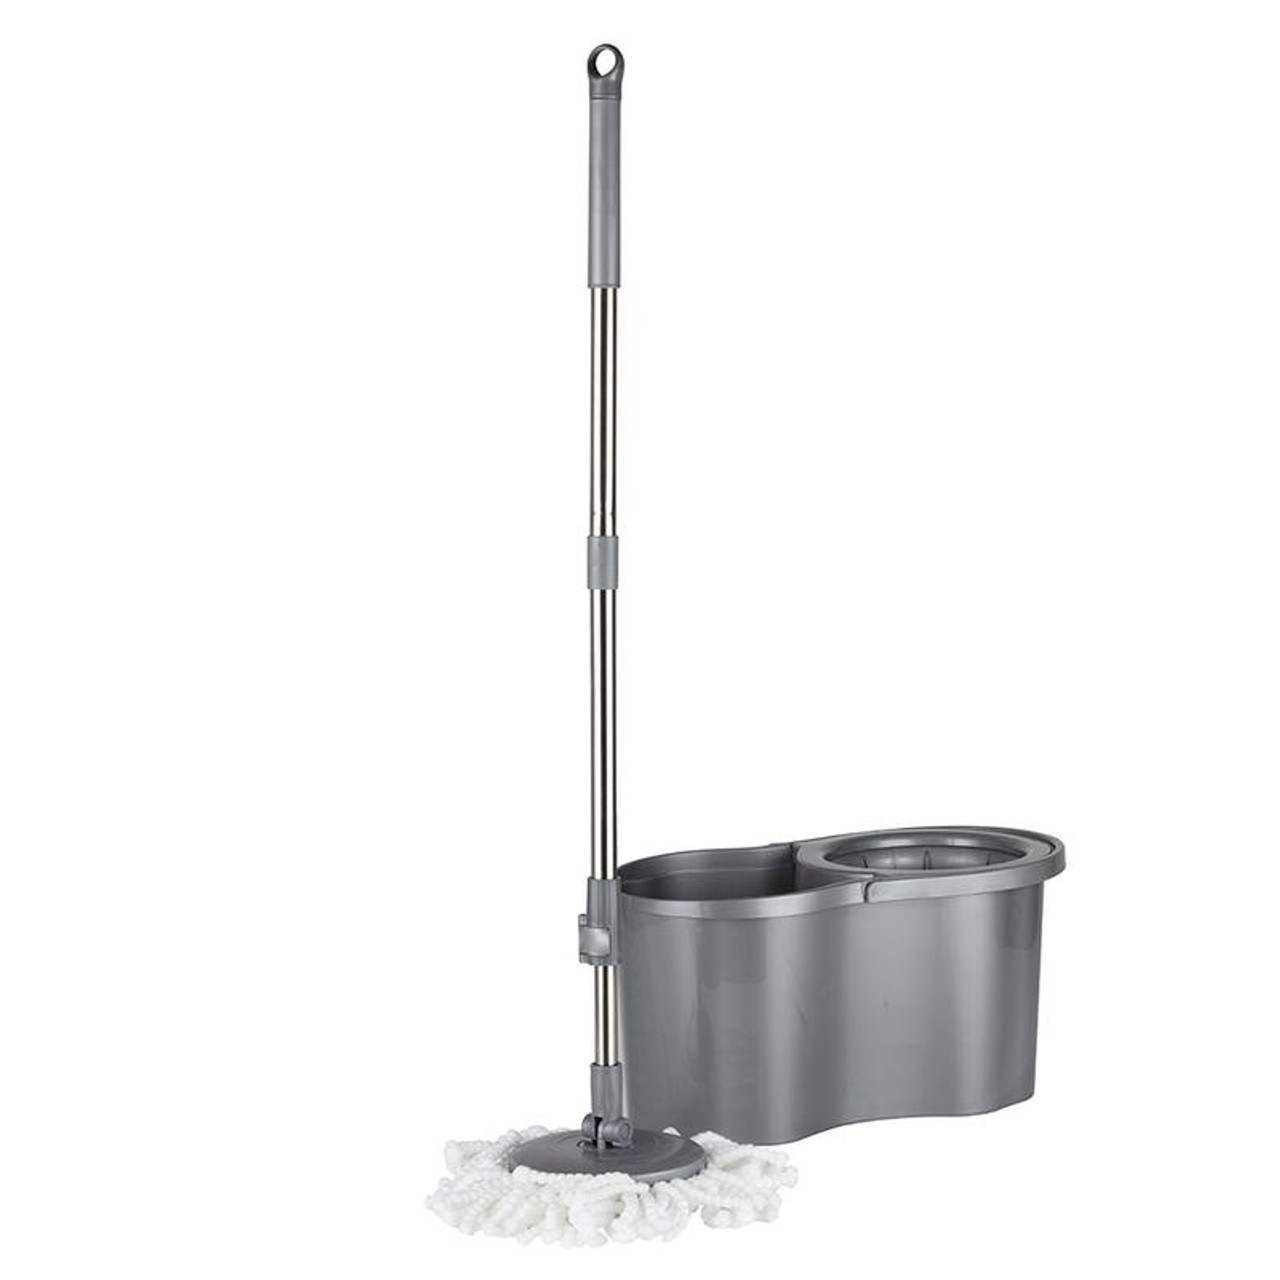 Our House - Essentials Spin Mop - SR22043 